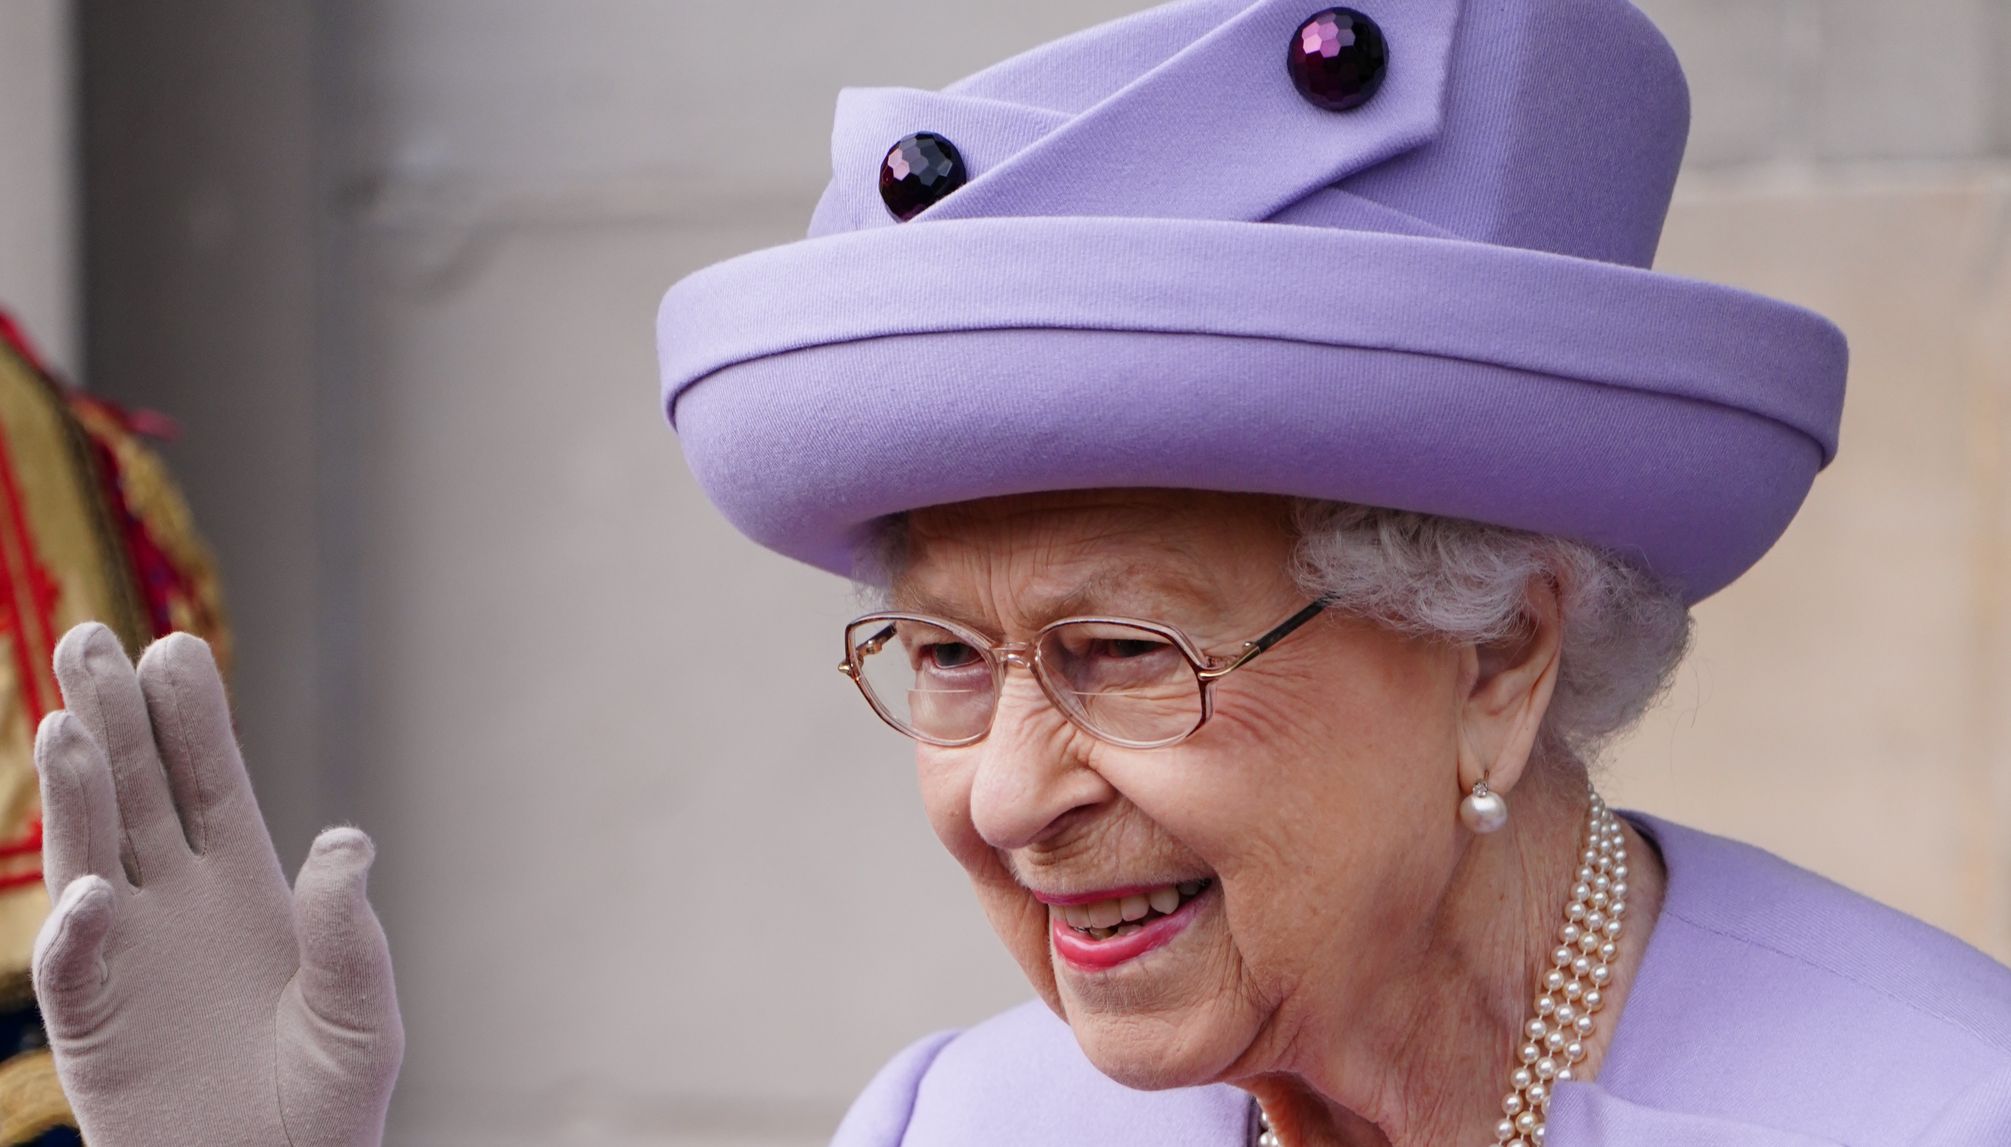 Queen Elizabeth II attends an armed forces act of loyalty parade in the gardens of the Palace of Holyroodhouse, Edinburgh, as they mark her platinum jubilee in Scotland. The ceremony is part of the Queen's traditional trip to Scotland for Holyrood Week. Picture date: Tuesday June 28, 2022.